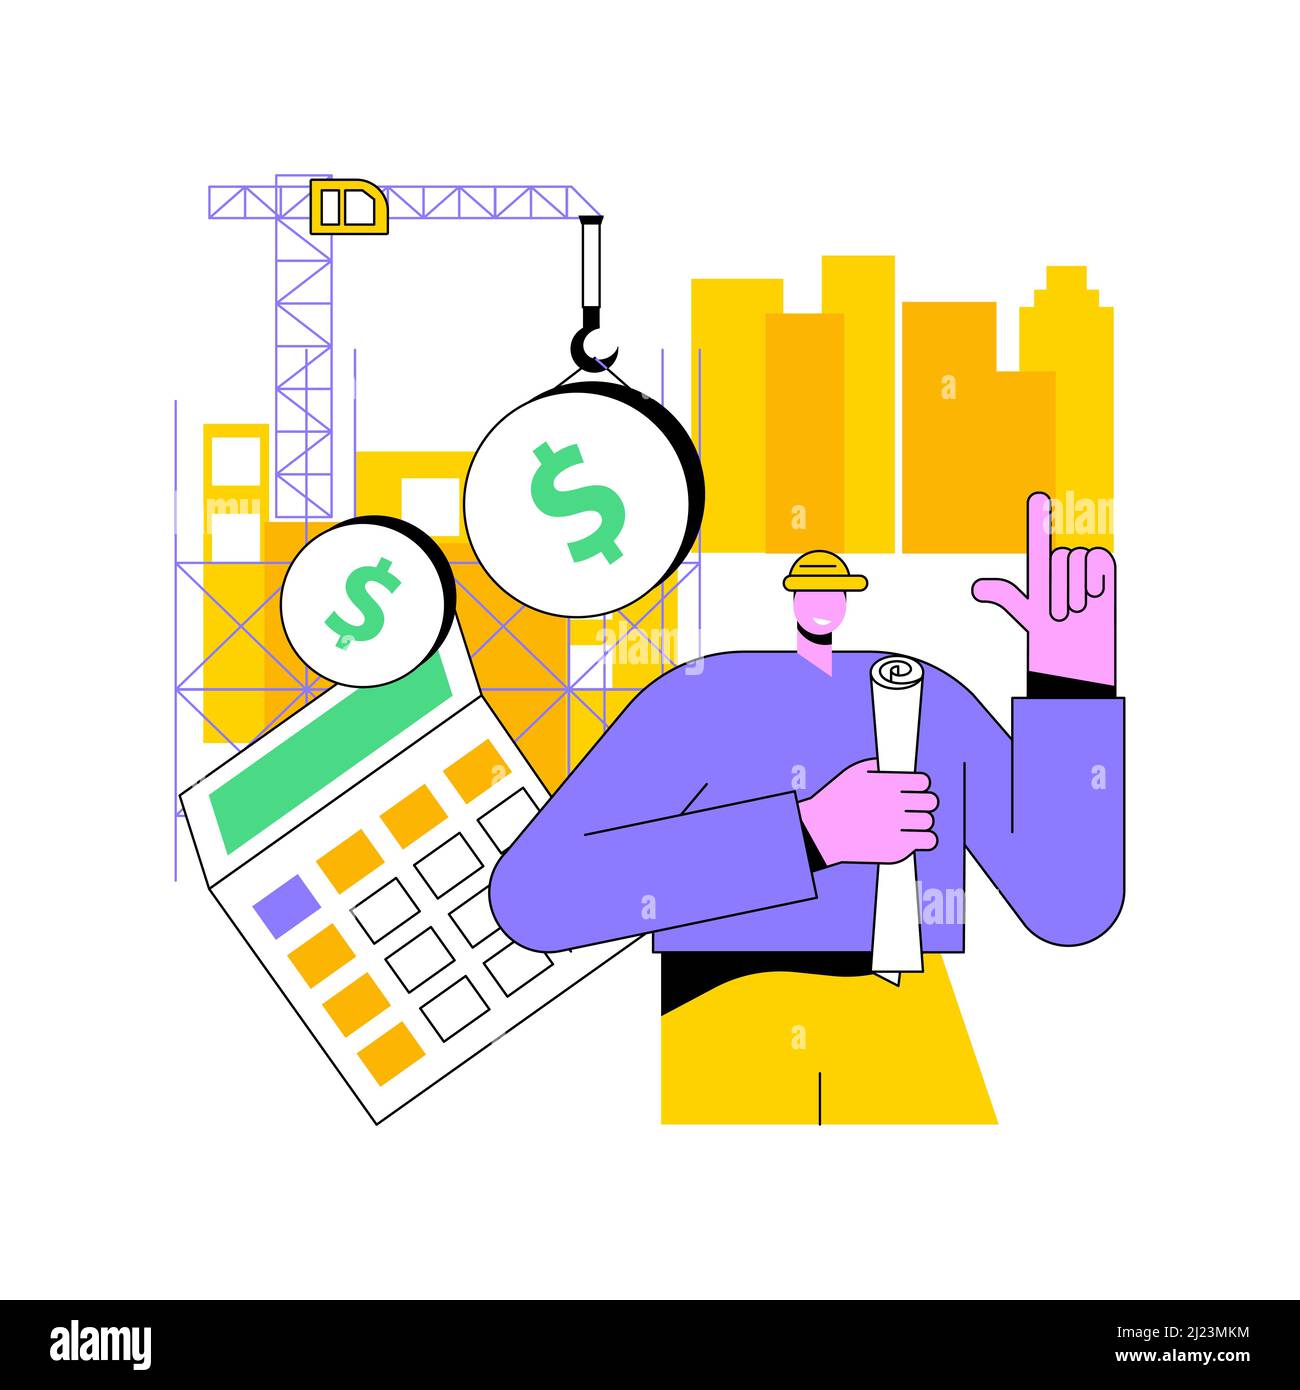 Construction costs abstract concept vector illustration. Project management, bank loan, real estate business, design project, building investment, contractor service, renovation abstract metaphor. Stock Vector